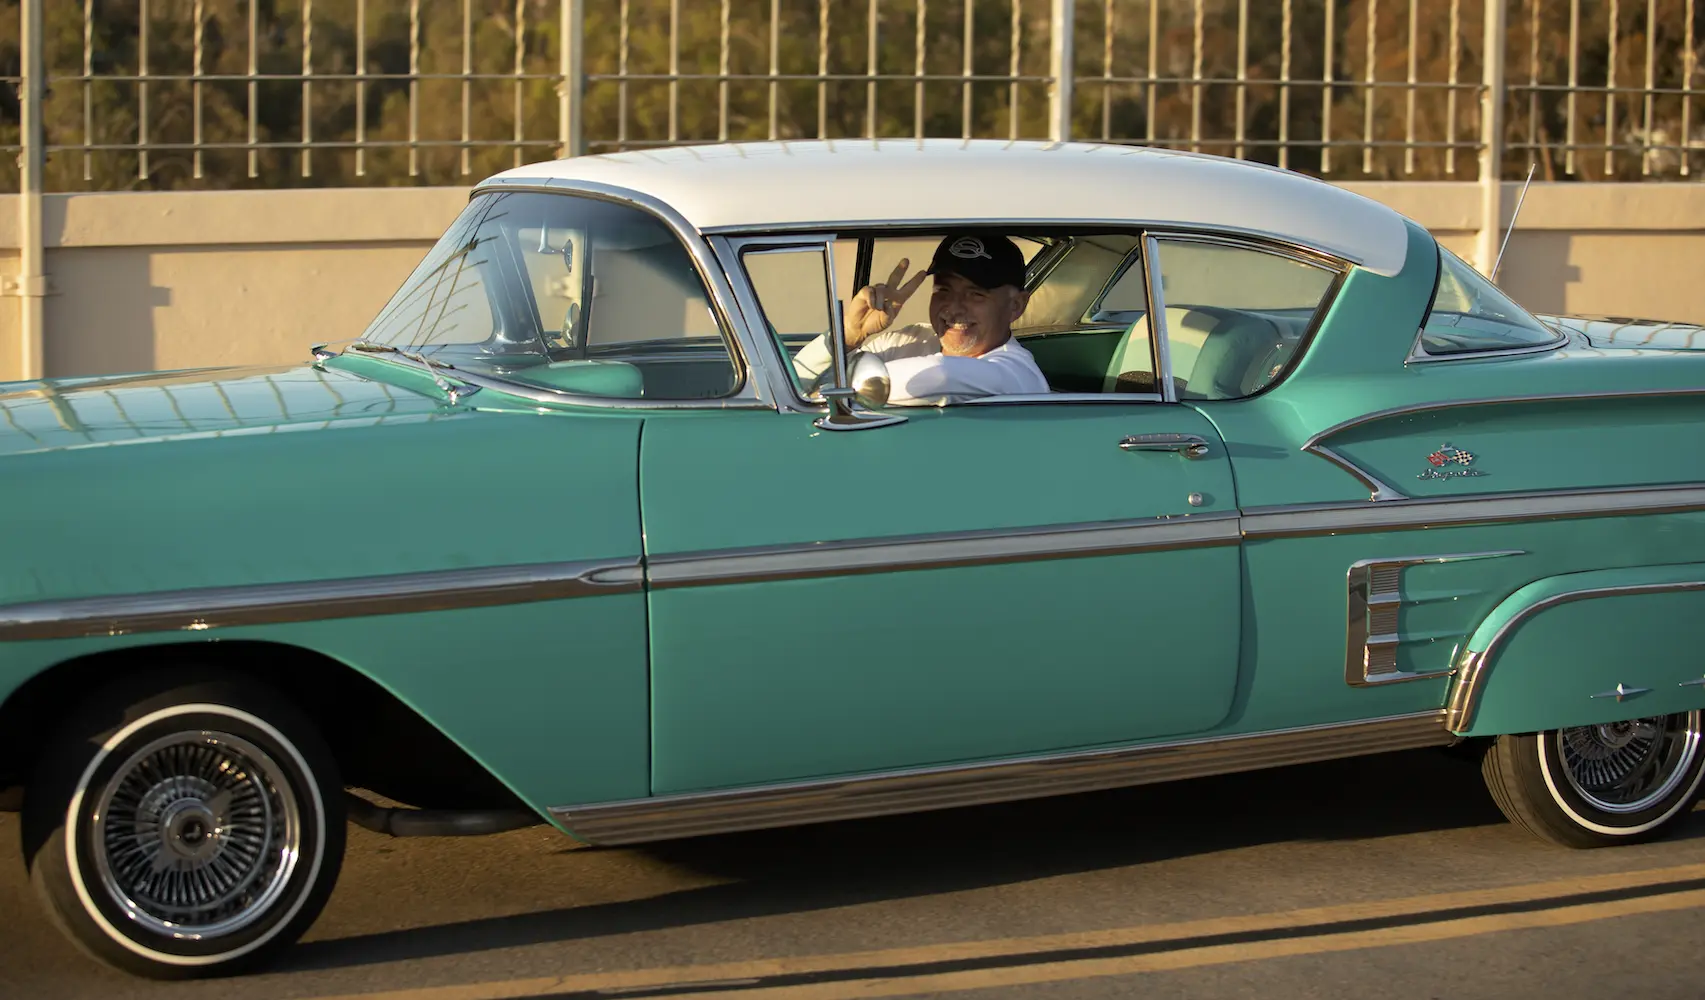 An adult driving an old classic car that is light blue with a white roof. The driver is wearing a white shirt with a black hat and giving the peace sign with their hand.